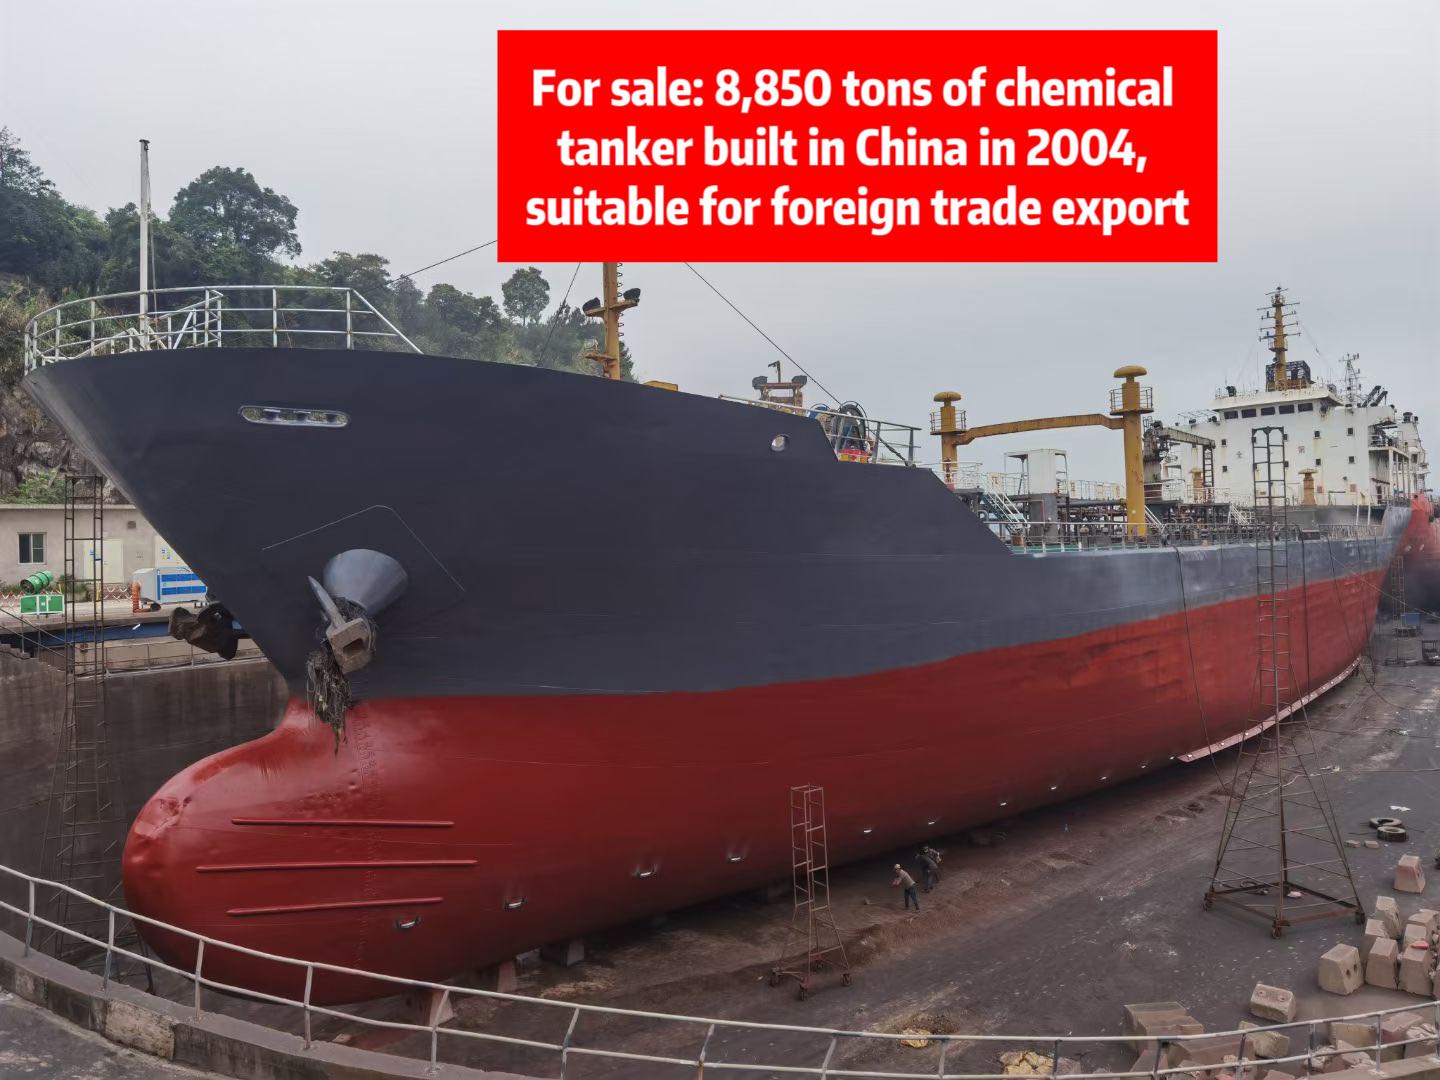 For sale: Built in China in 2004, 8850 tons of chemical oil tanker, suitable for foreign trade expor